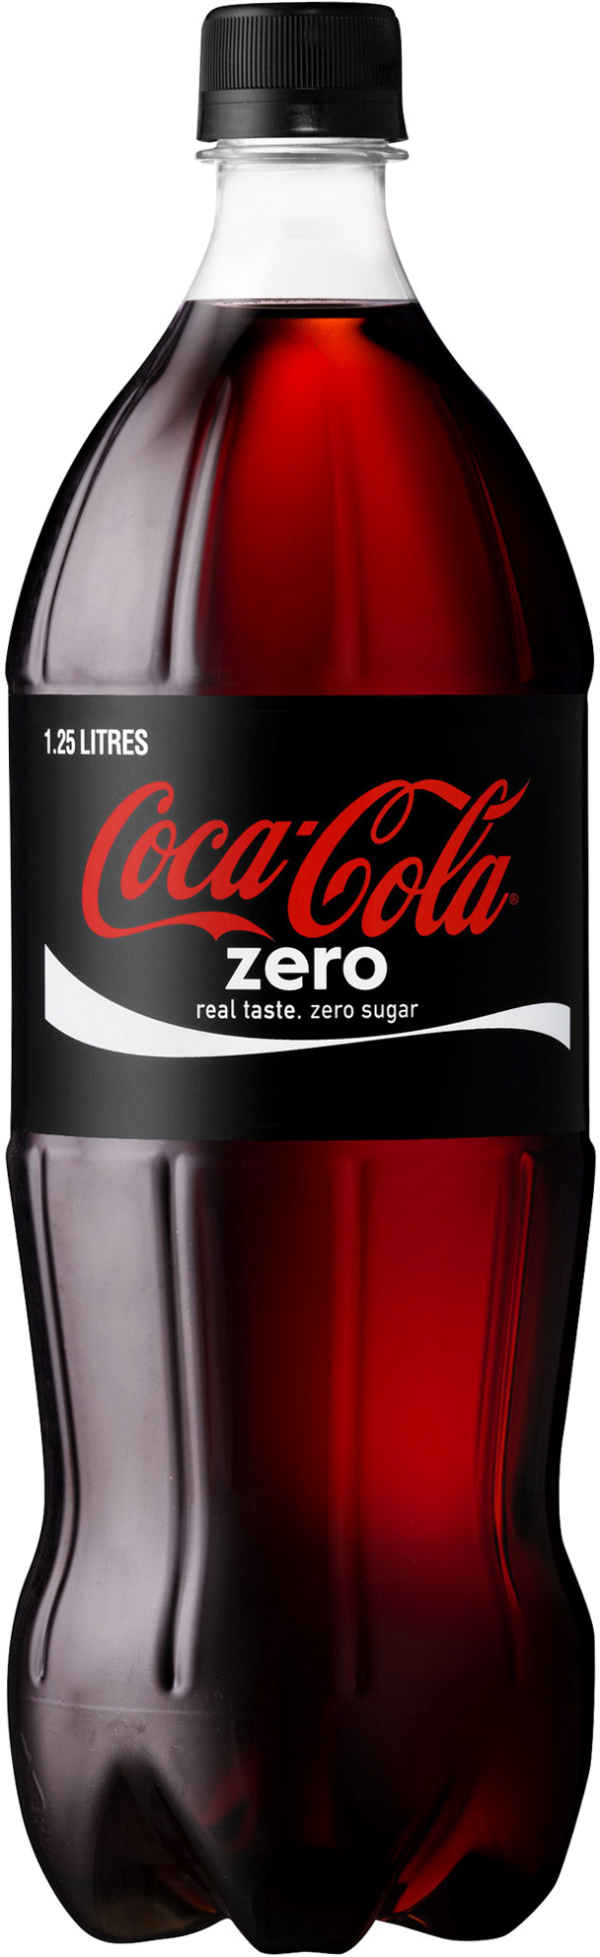 cocacola png free download 35